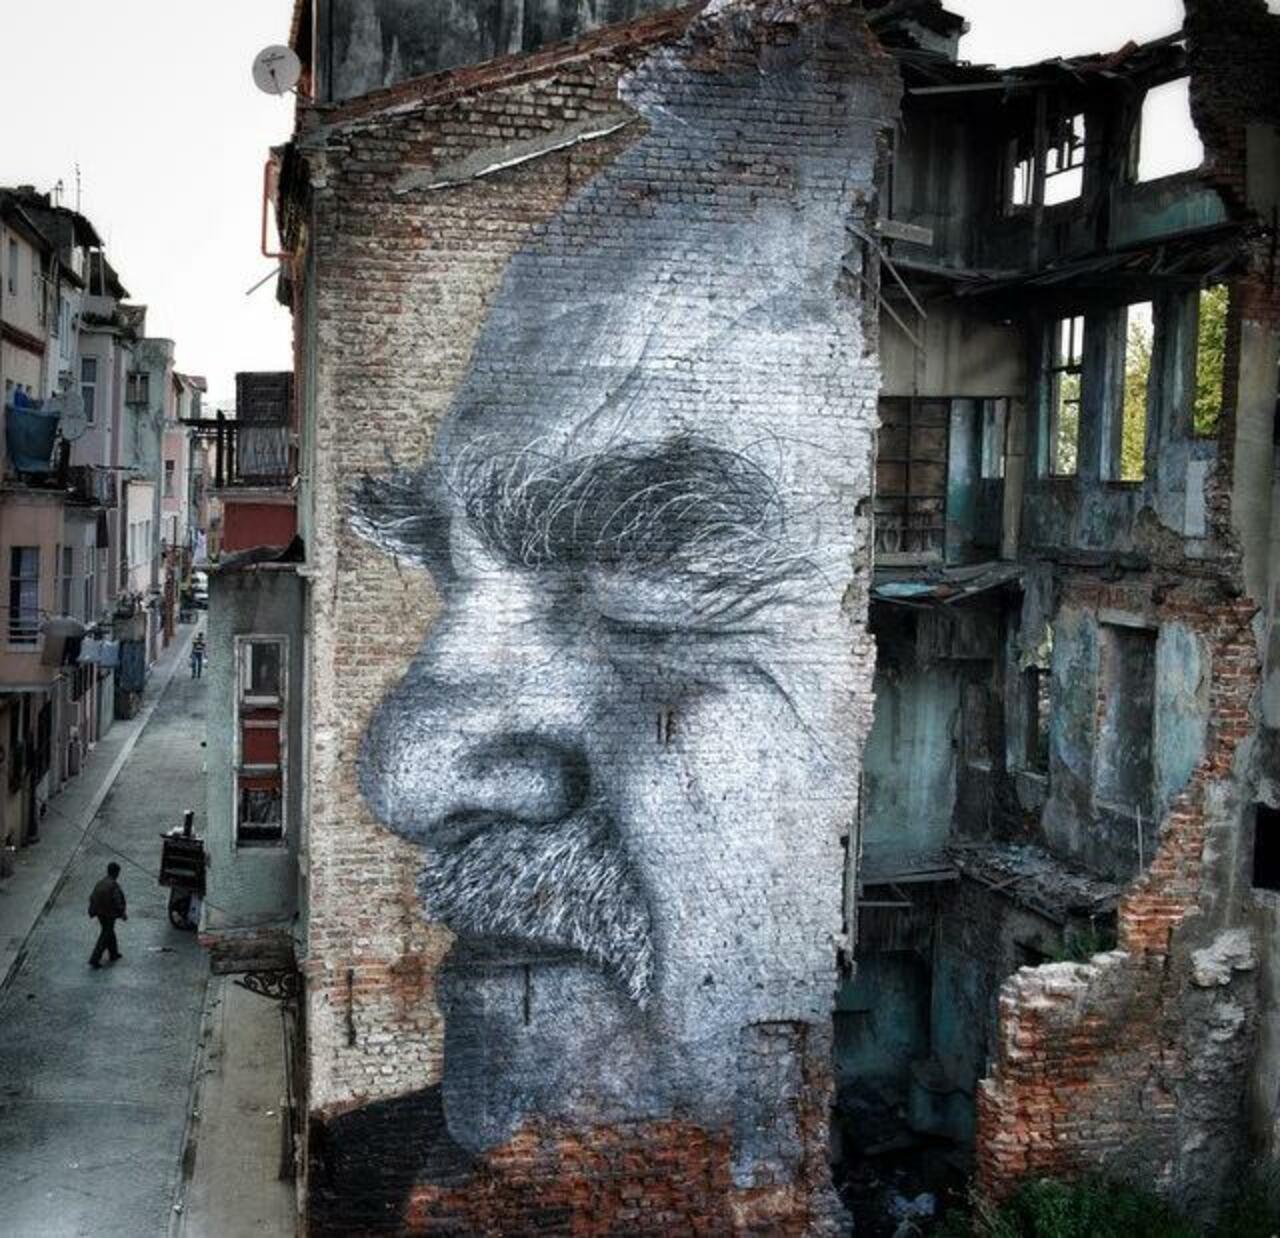 Street Art by JR in Istanbul & after local police painted over it 

#art #arte #graffiti #streetart http://t.co/oomWMPbZ4Q